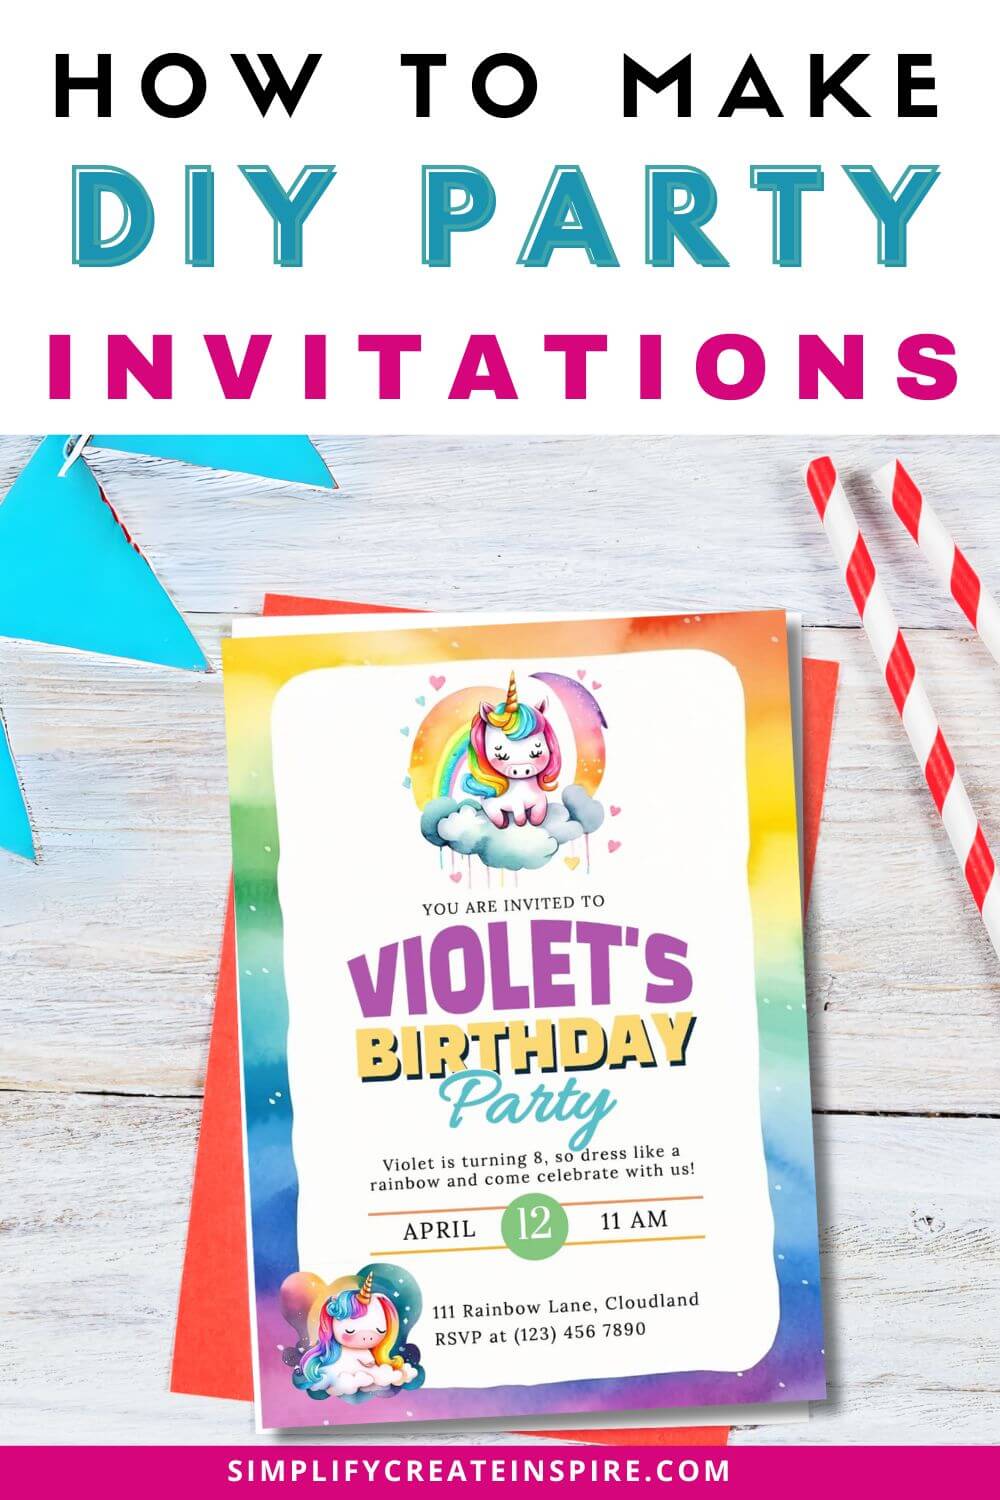 How to make diy party invitations pinterest image.